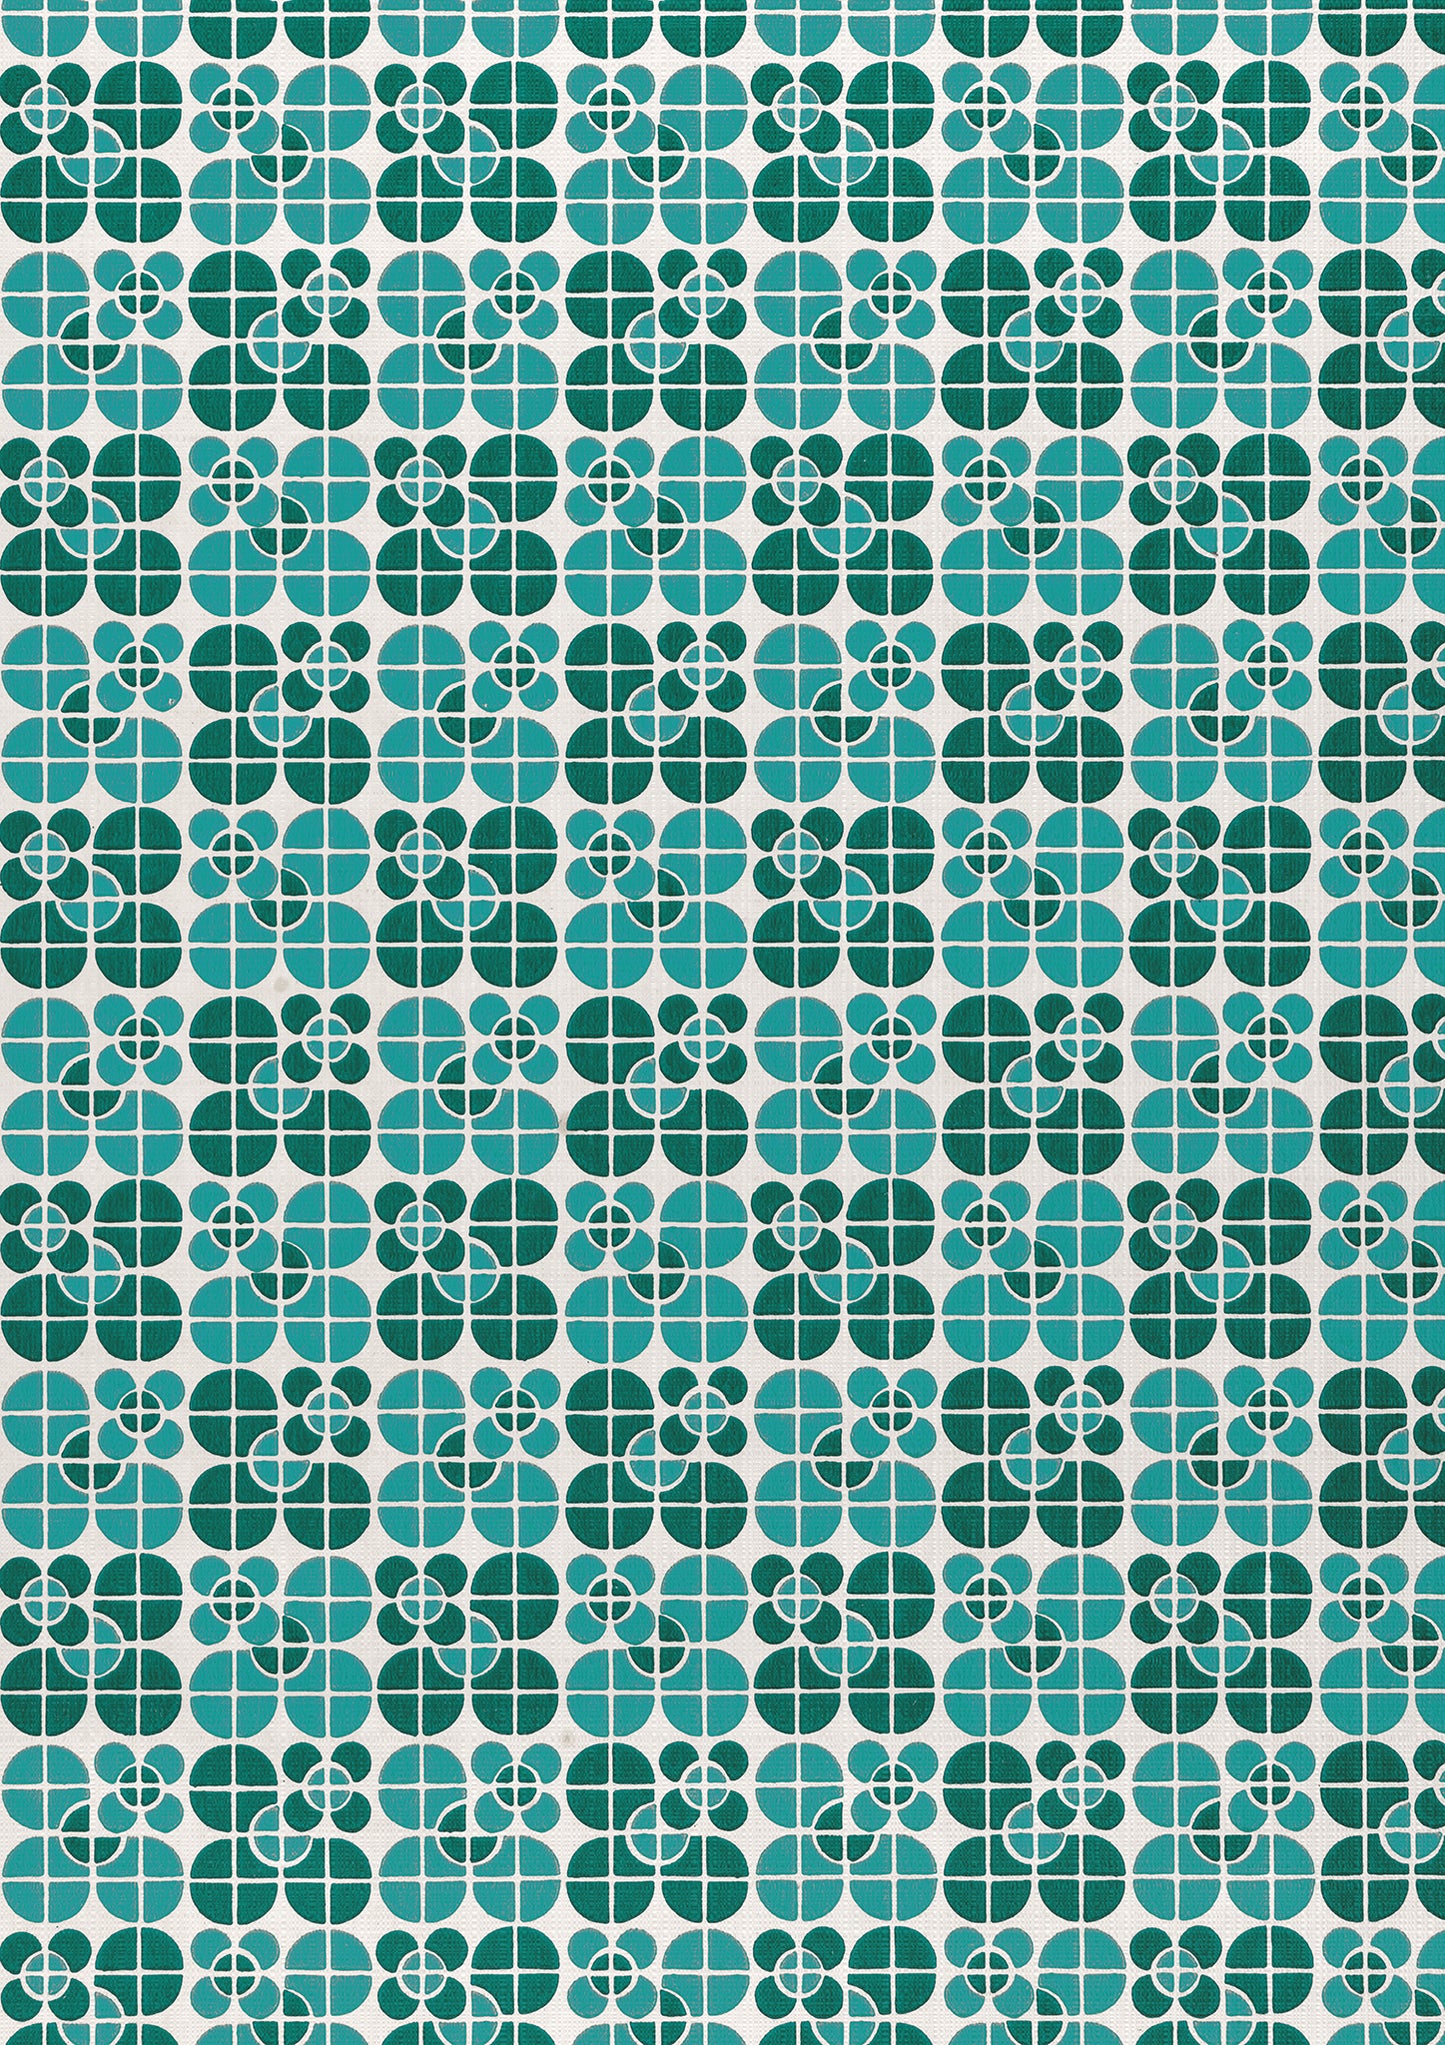 Teal and Green A1 Photography Backdrop - Vintage Wallpaper